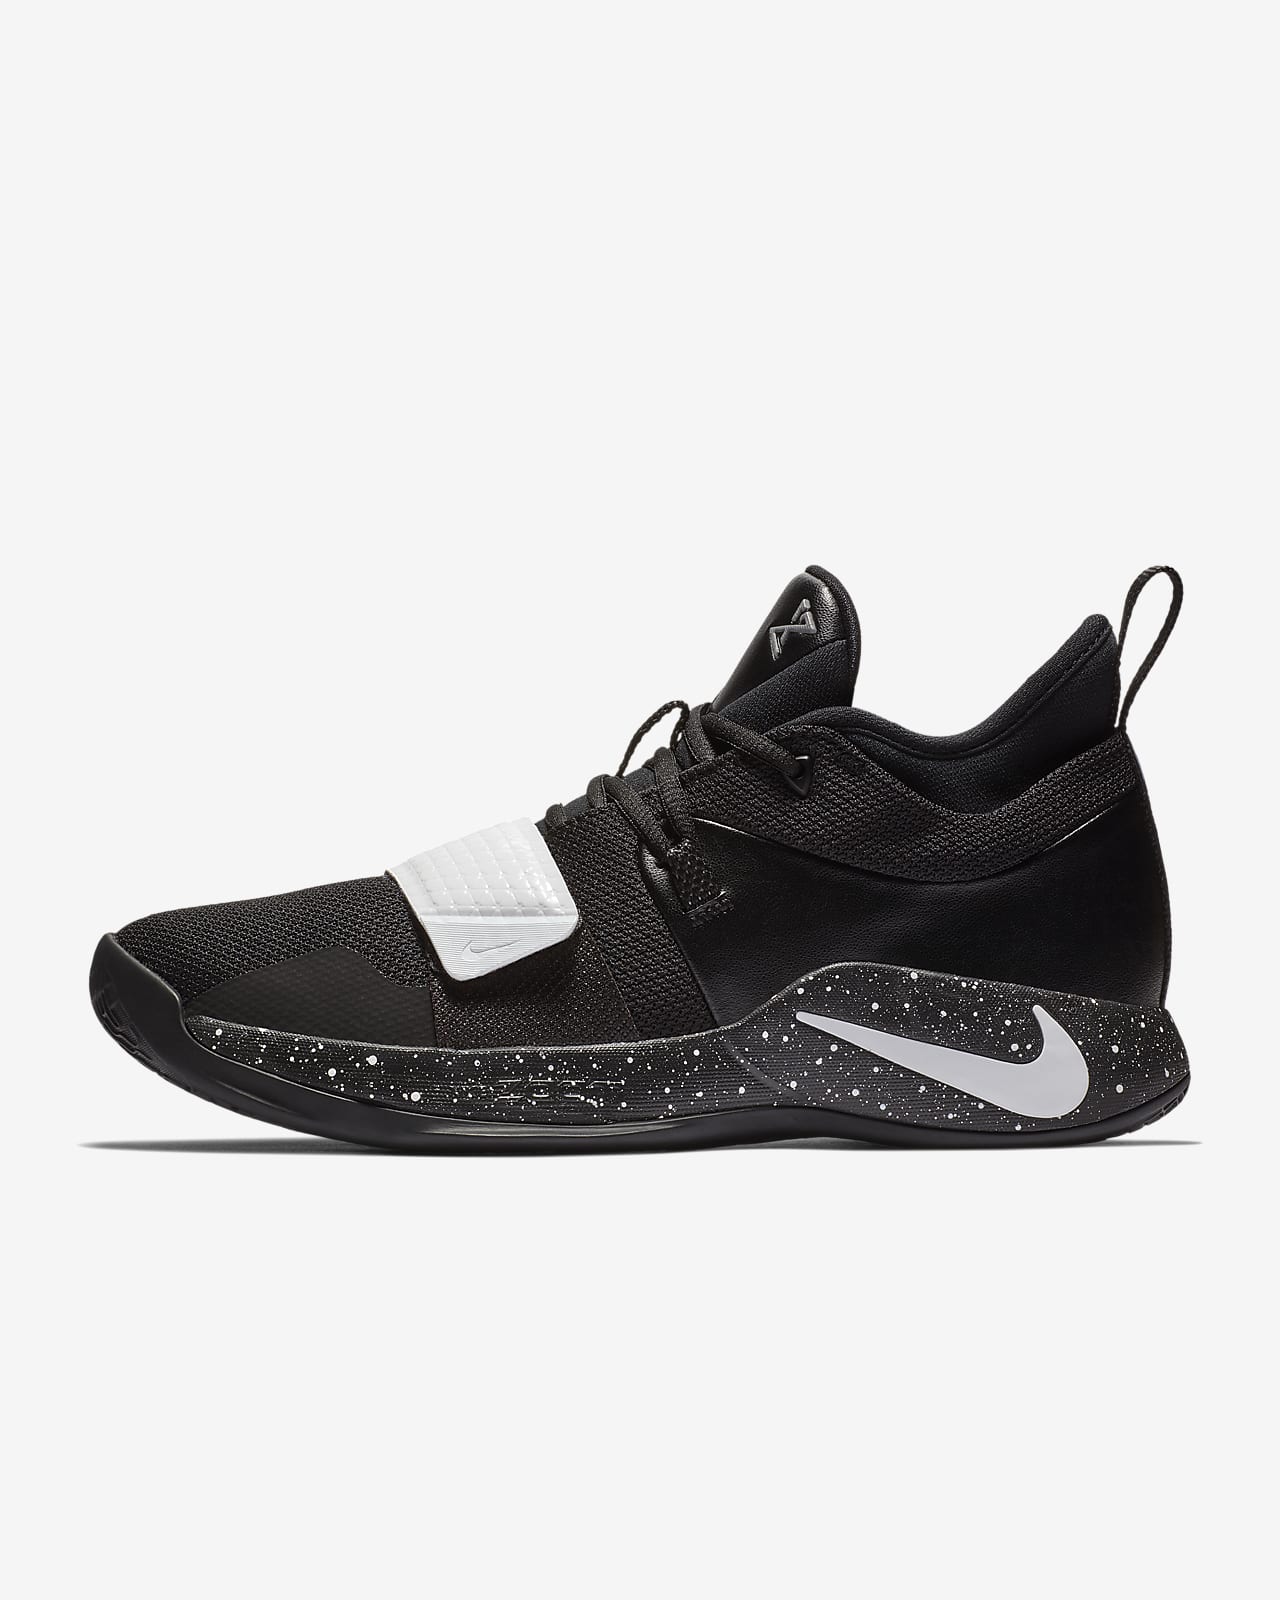 pg2 5 basketball shoes online -